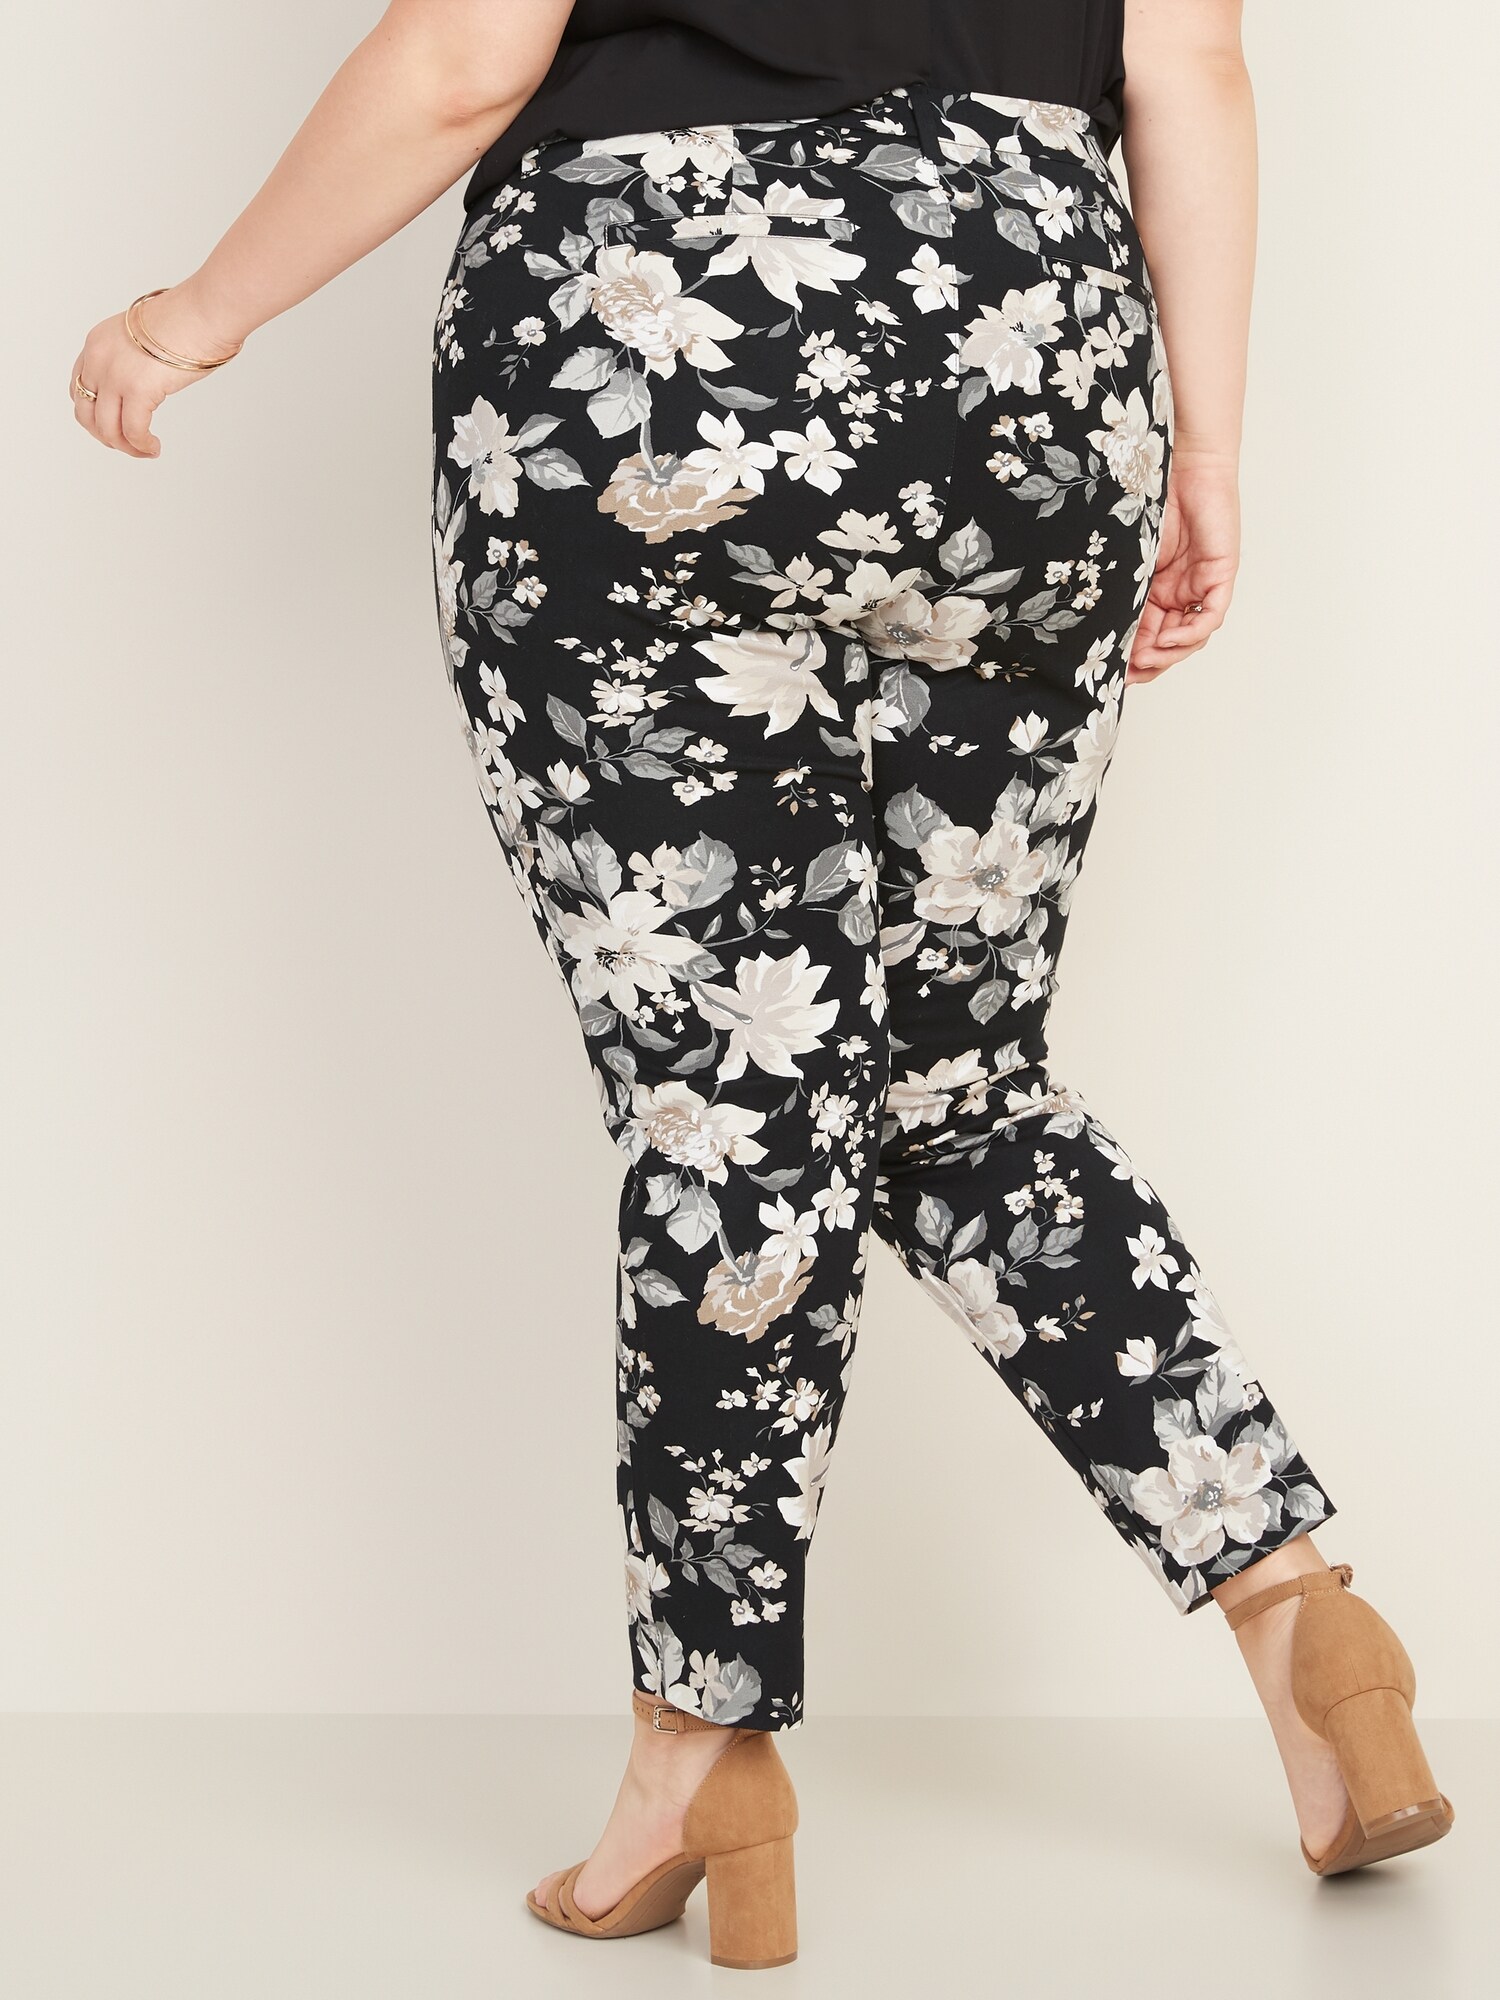 Old Navy Pixie Pants Review - Thrifty Pineapple